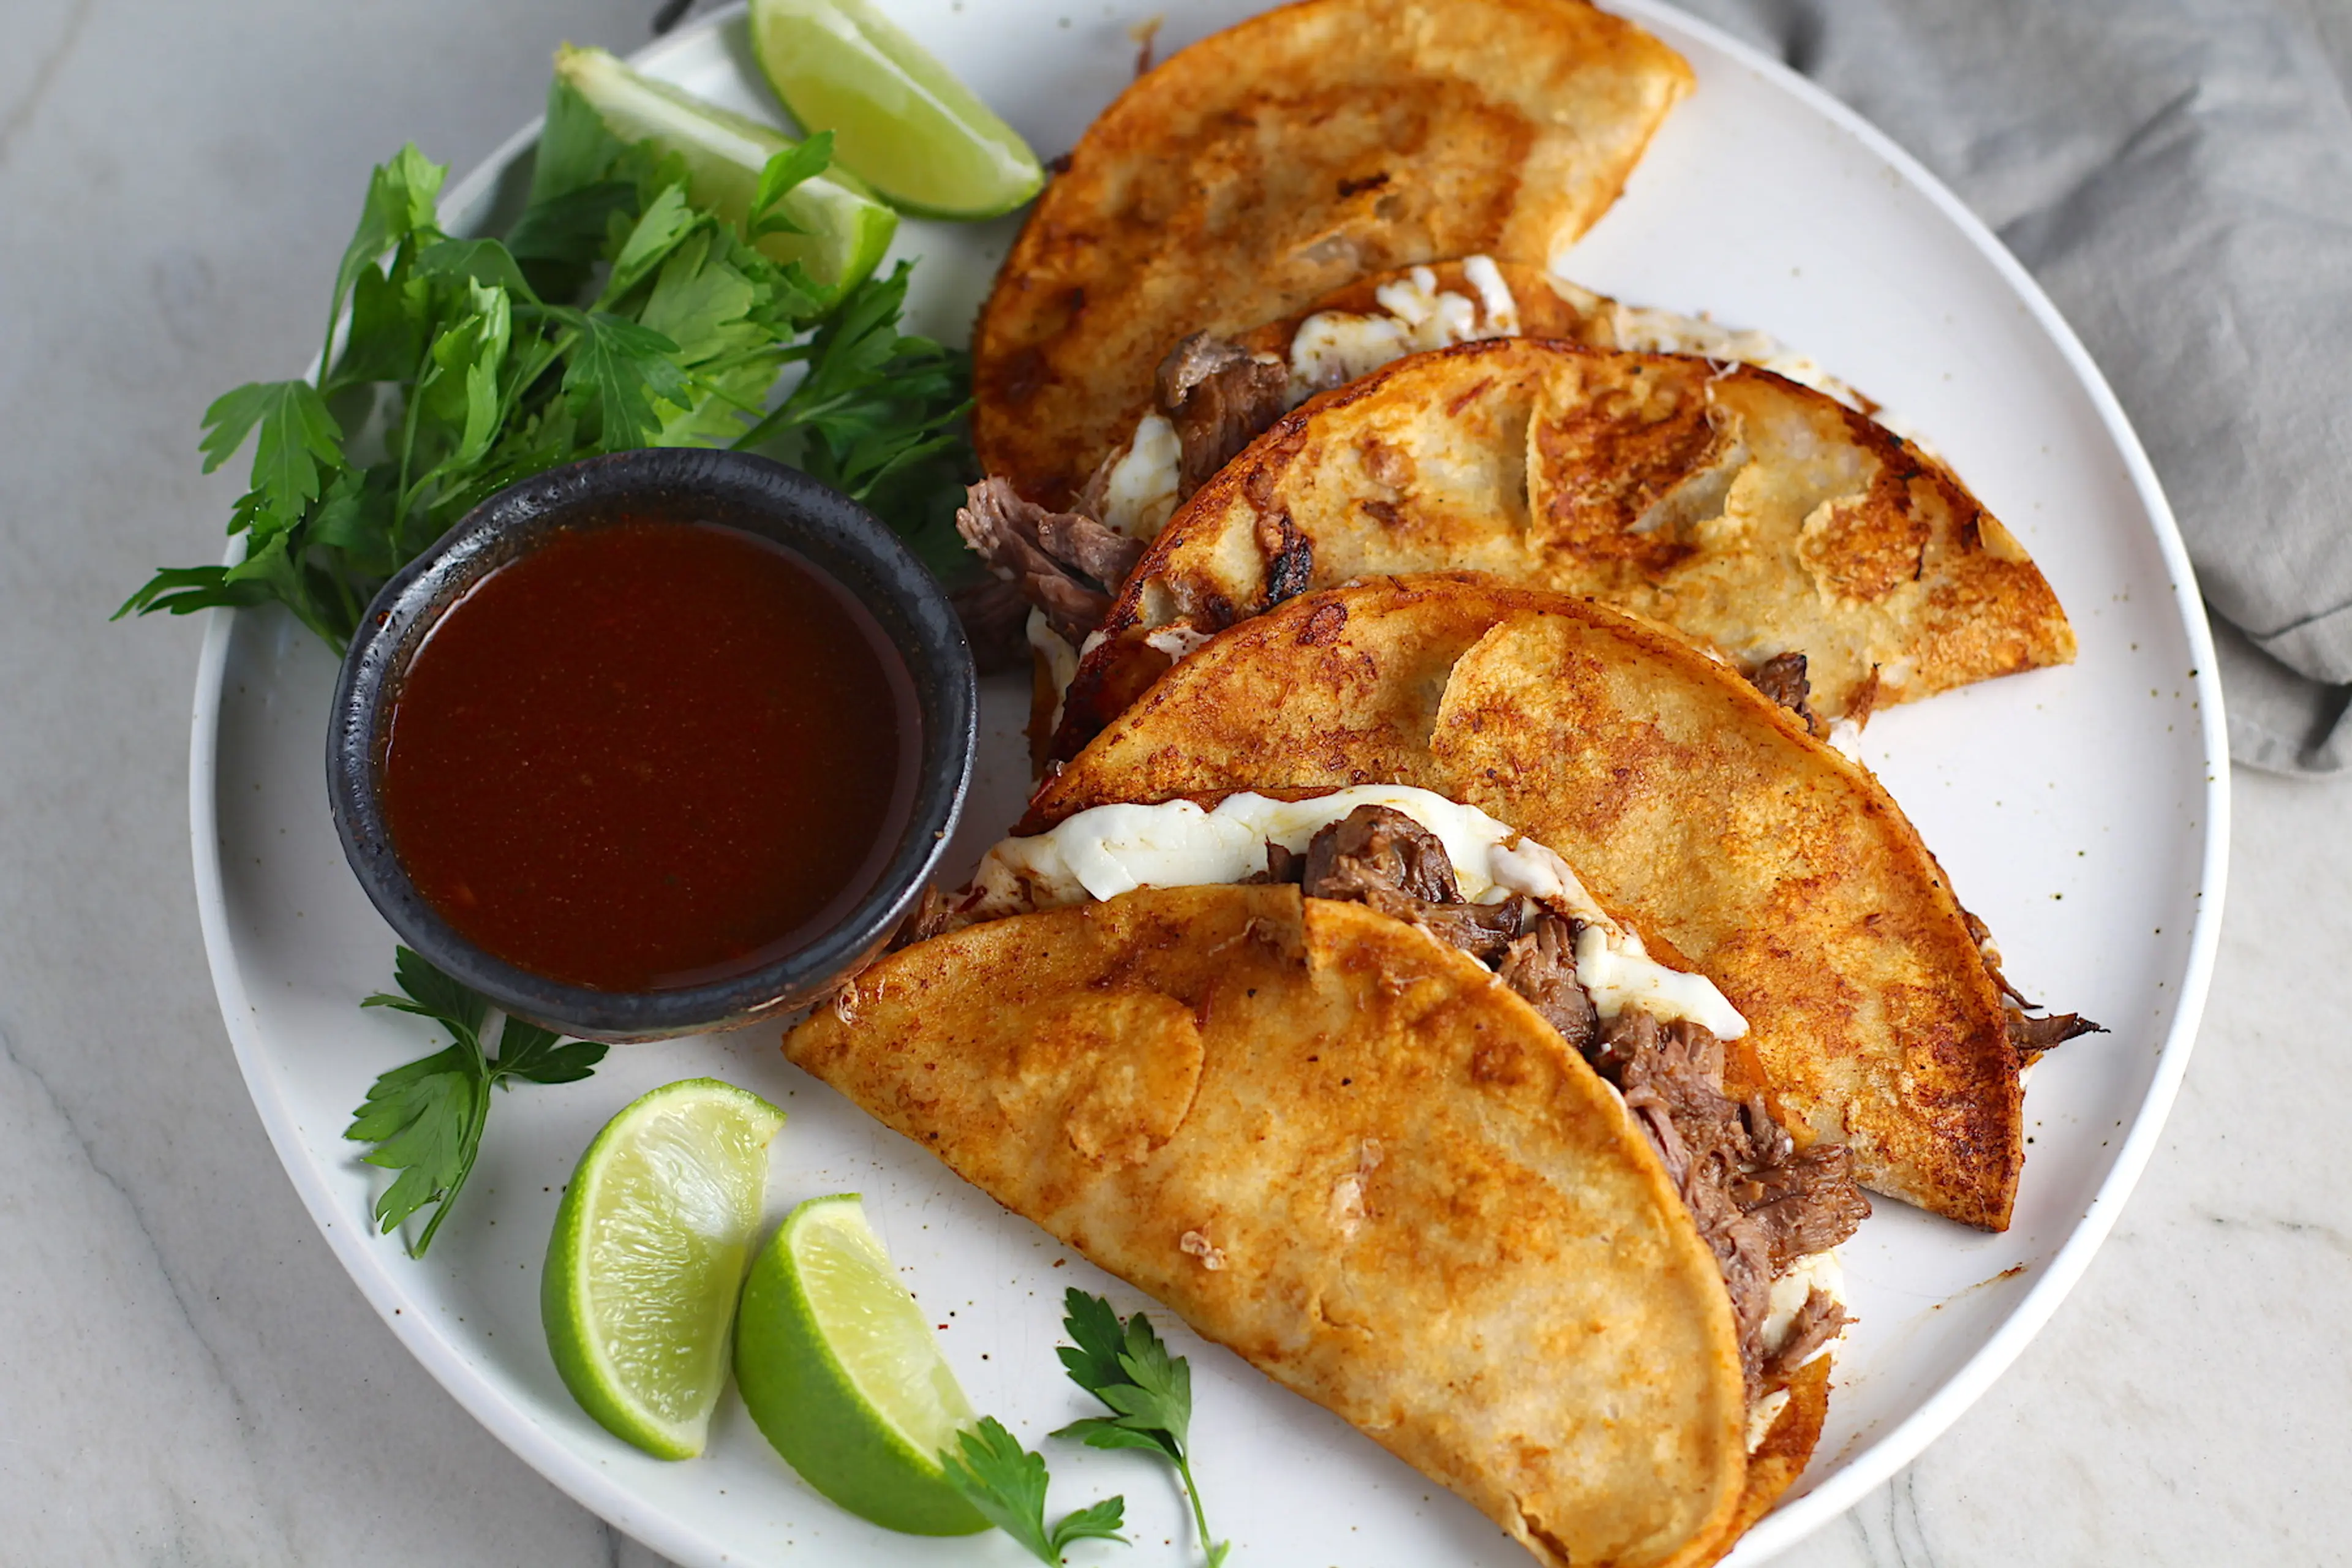 Easy Birria Tacos with Consomme in the Slow Cooker